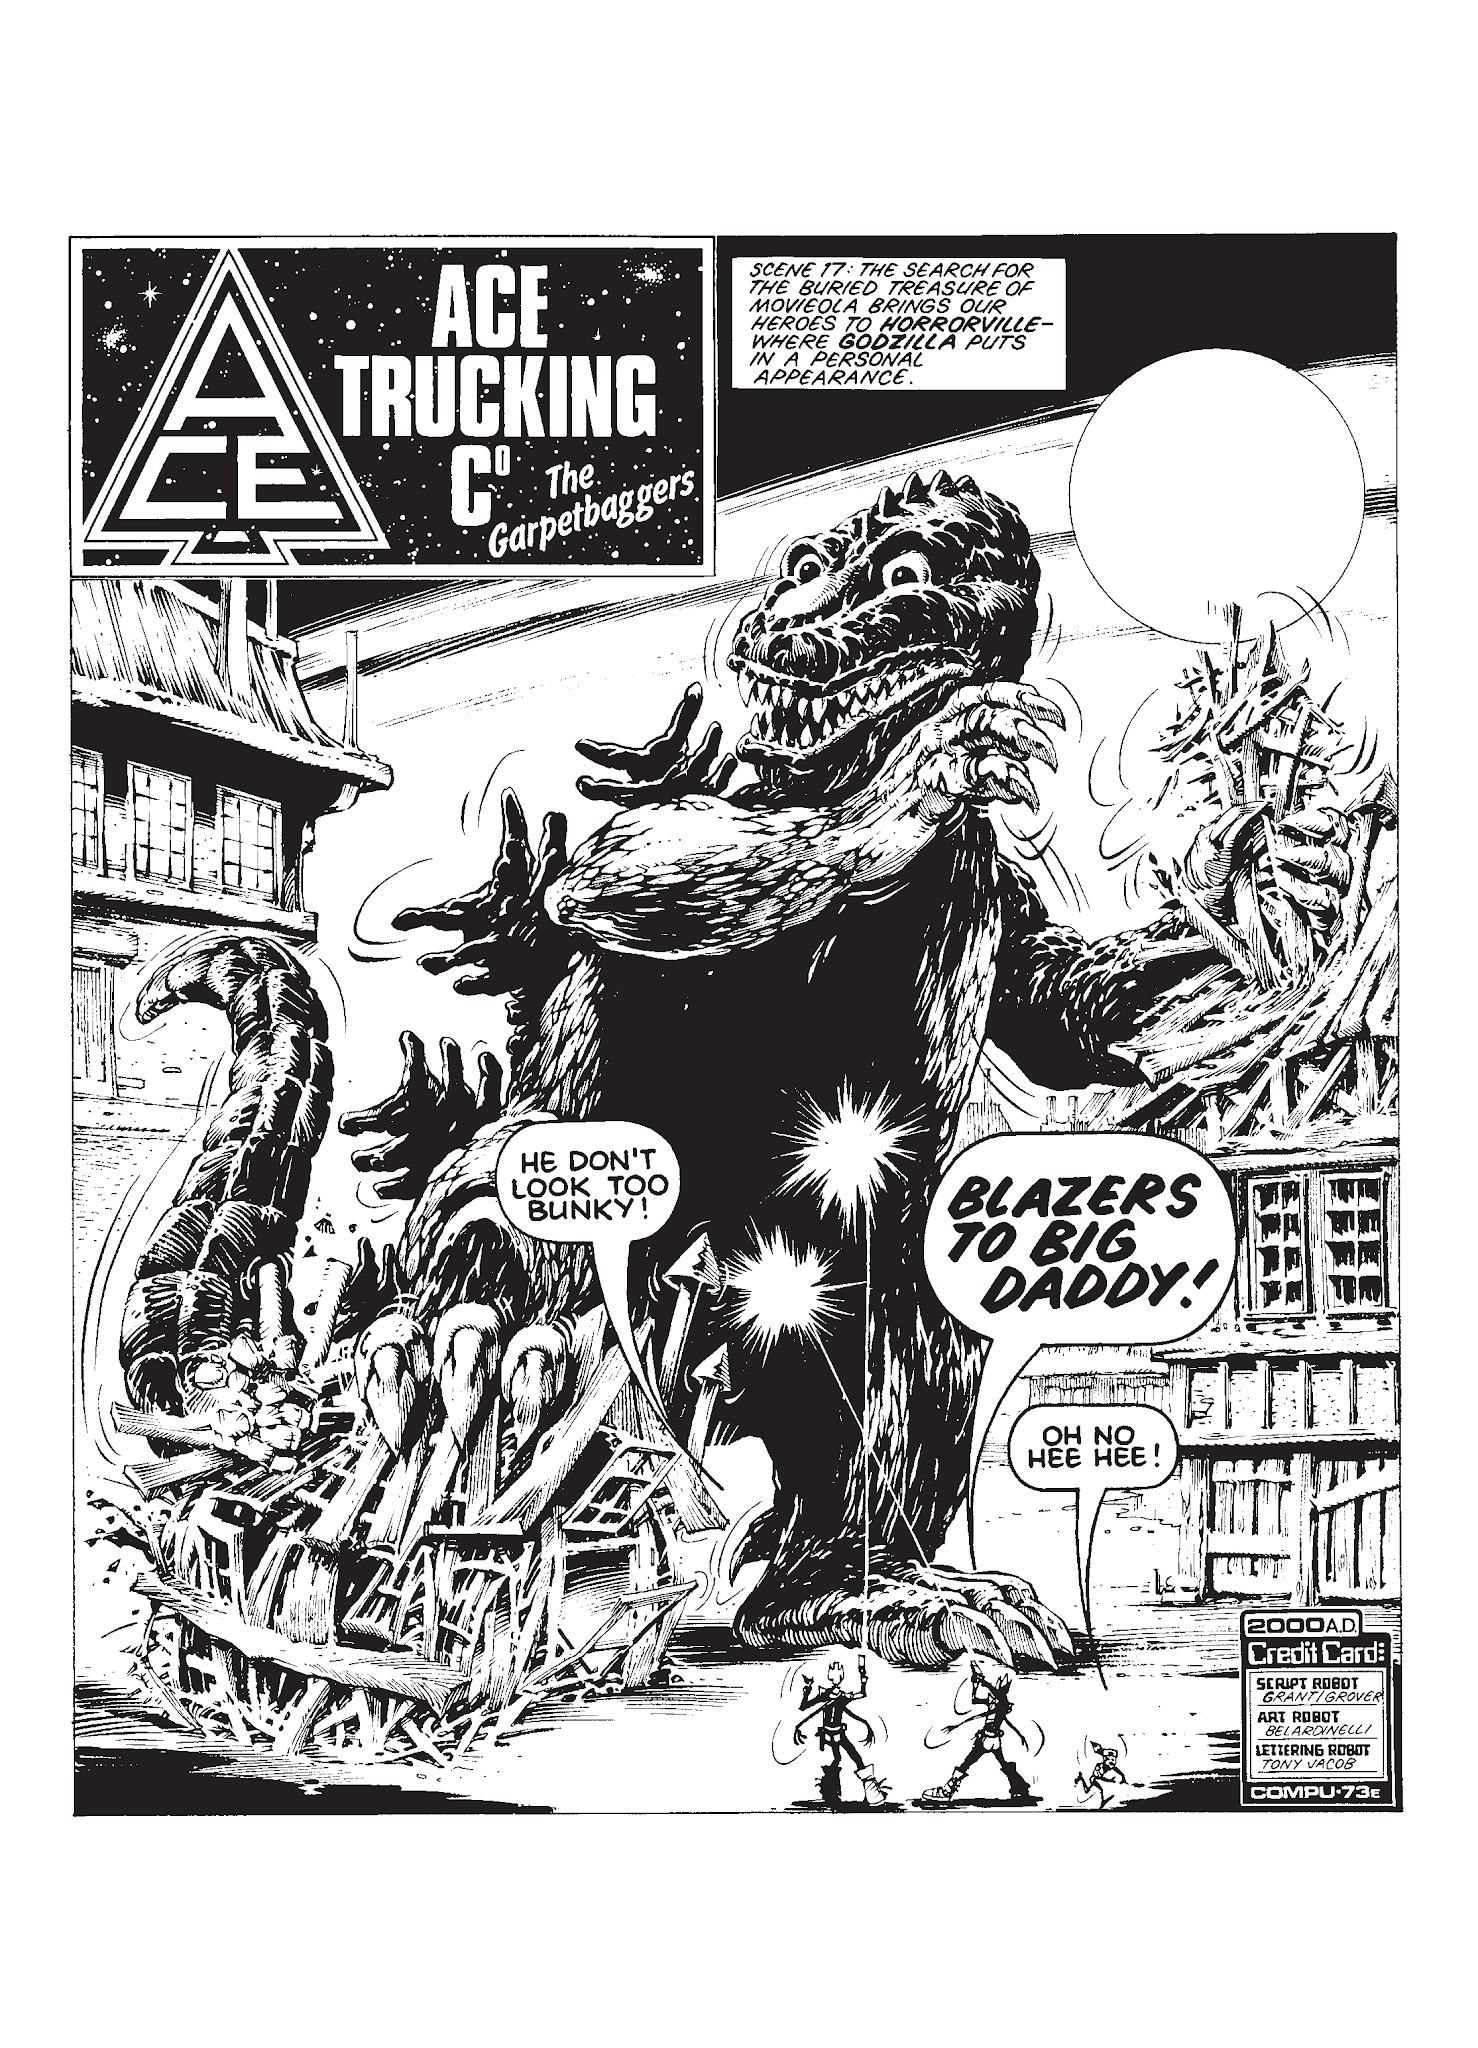 Read online The Complete Ace Trucking Co. comic -  Issue # TPB 2 - 298